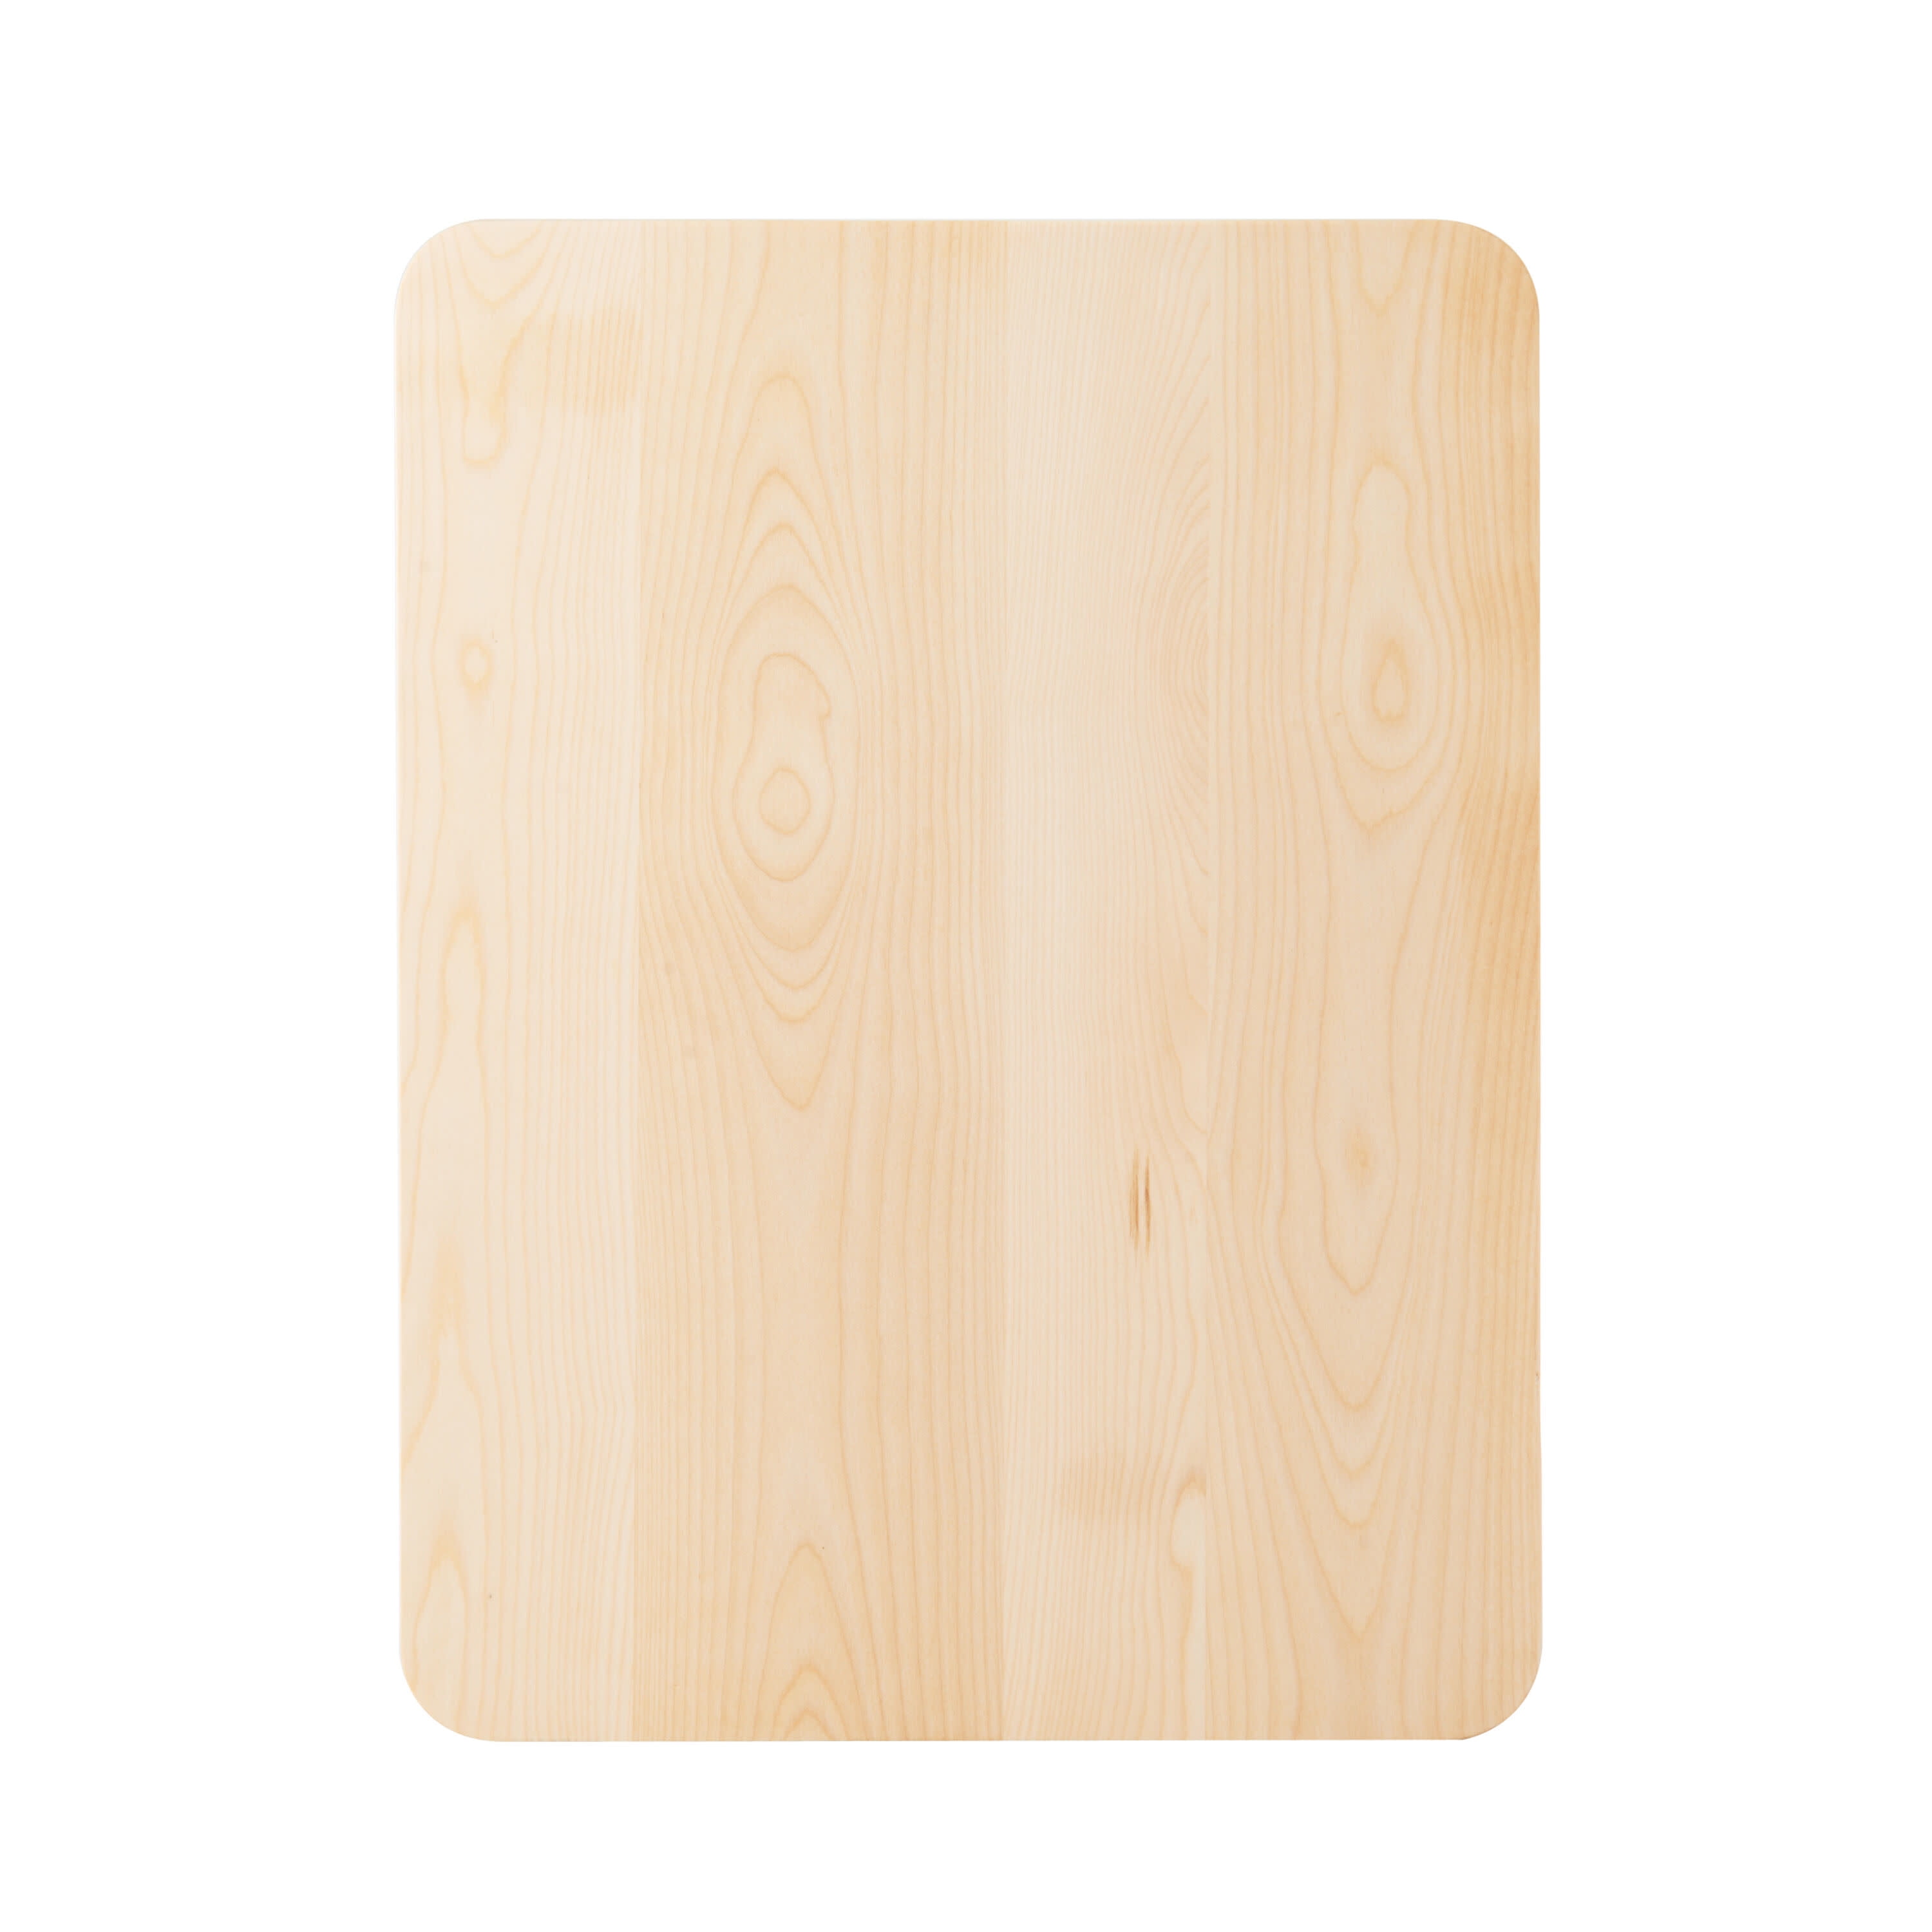 KitchenAid Classic Rubberwood Cutting Board with Perimeter Trench,  Extra-Large Reversible Chopping Board, 12-inch x 18-inch, Natural :  Everything Else 